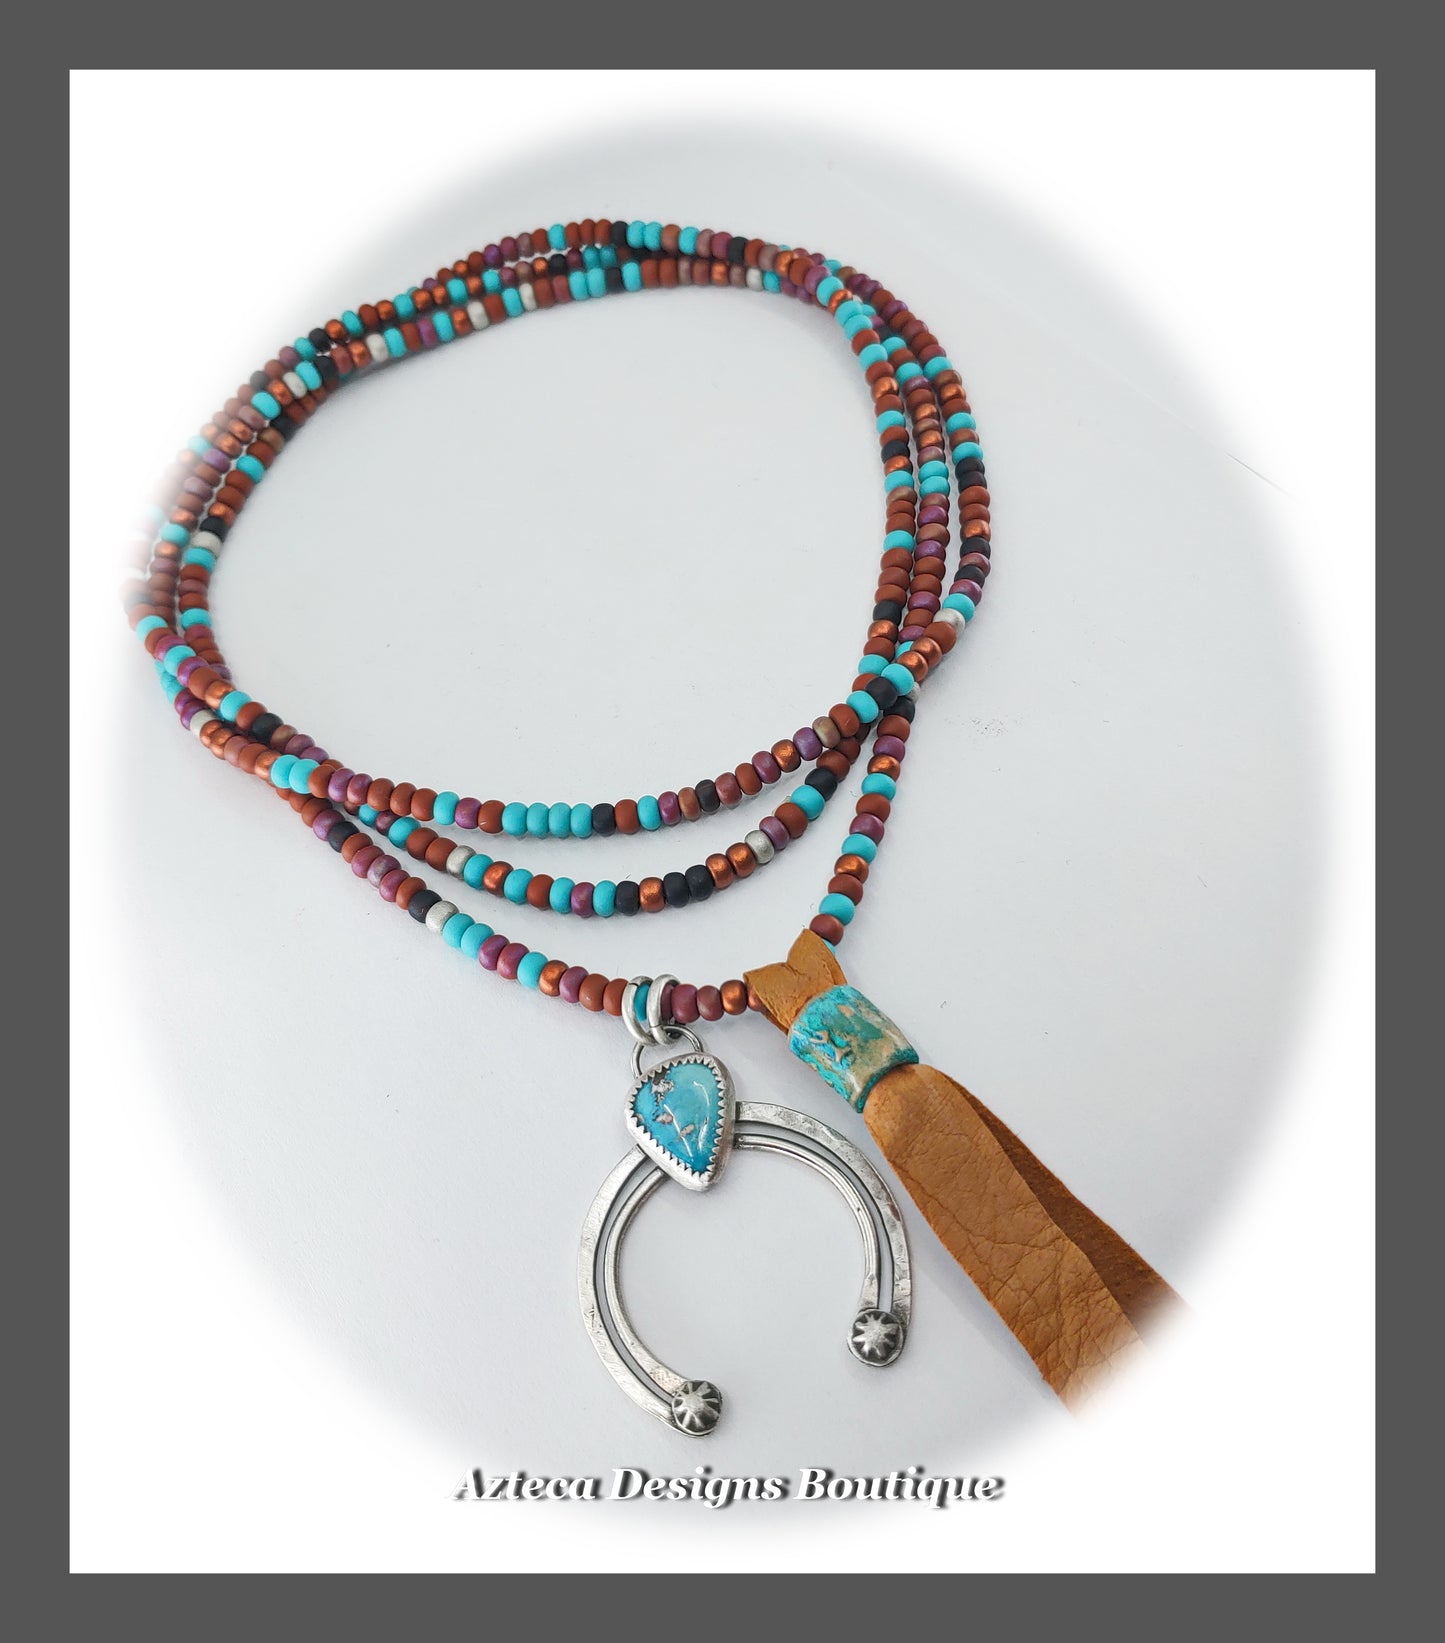 Pinto Valley Turquoise Long Beaded Necklace + Hand Fabricated Argentium Silver + Leather + Glass Beads